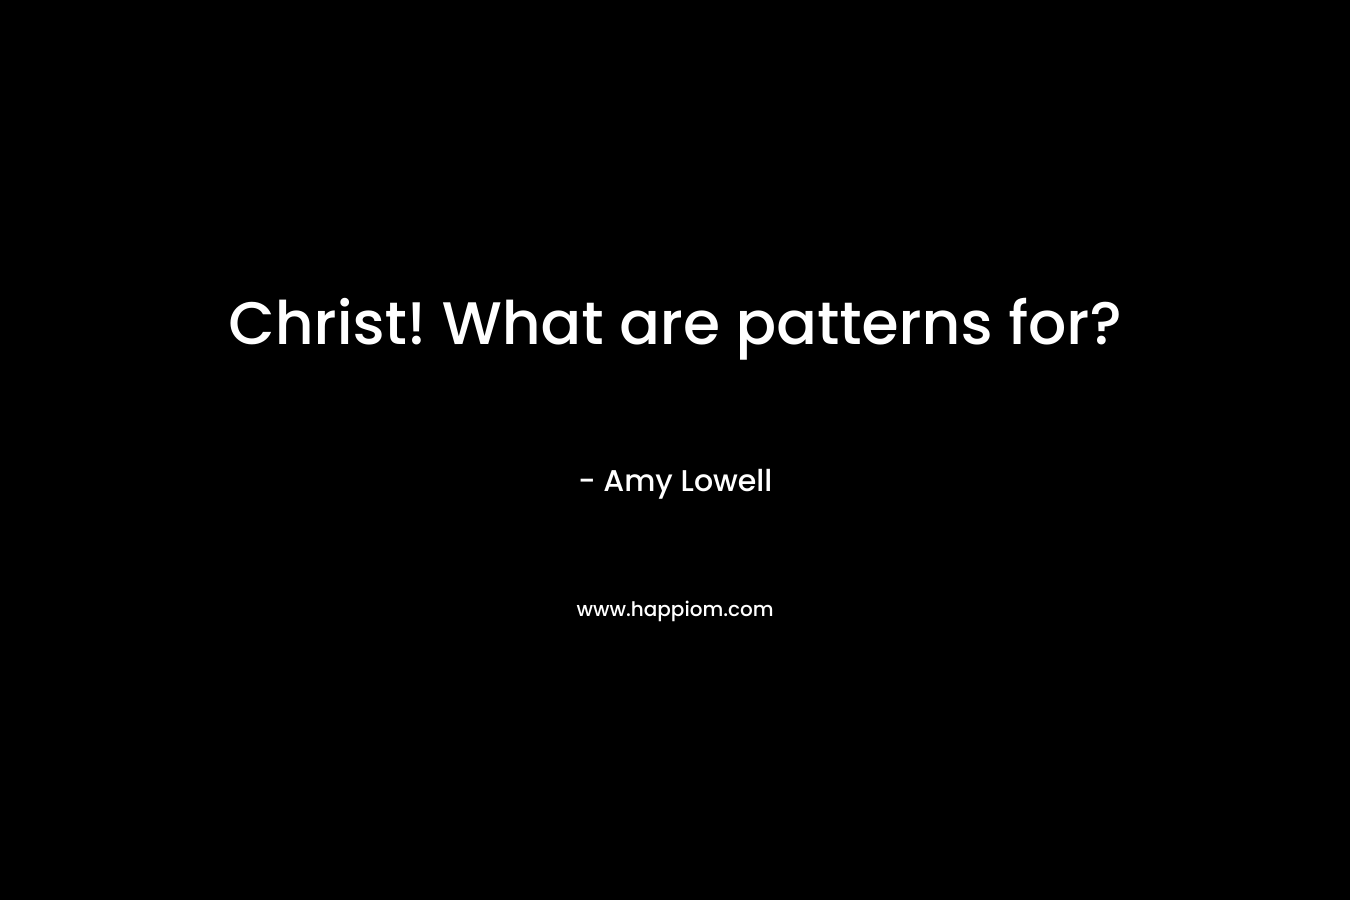 Christ! What are patterns for?